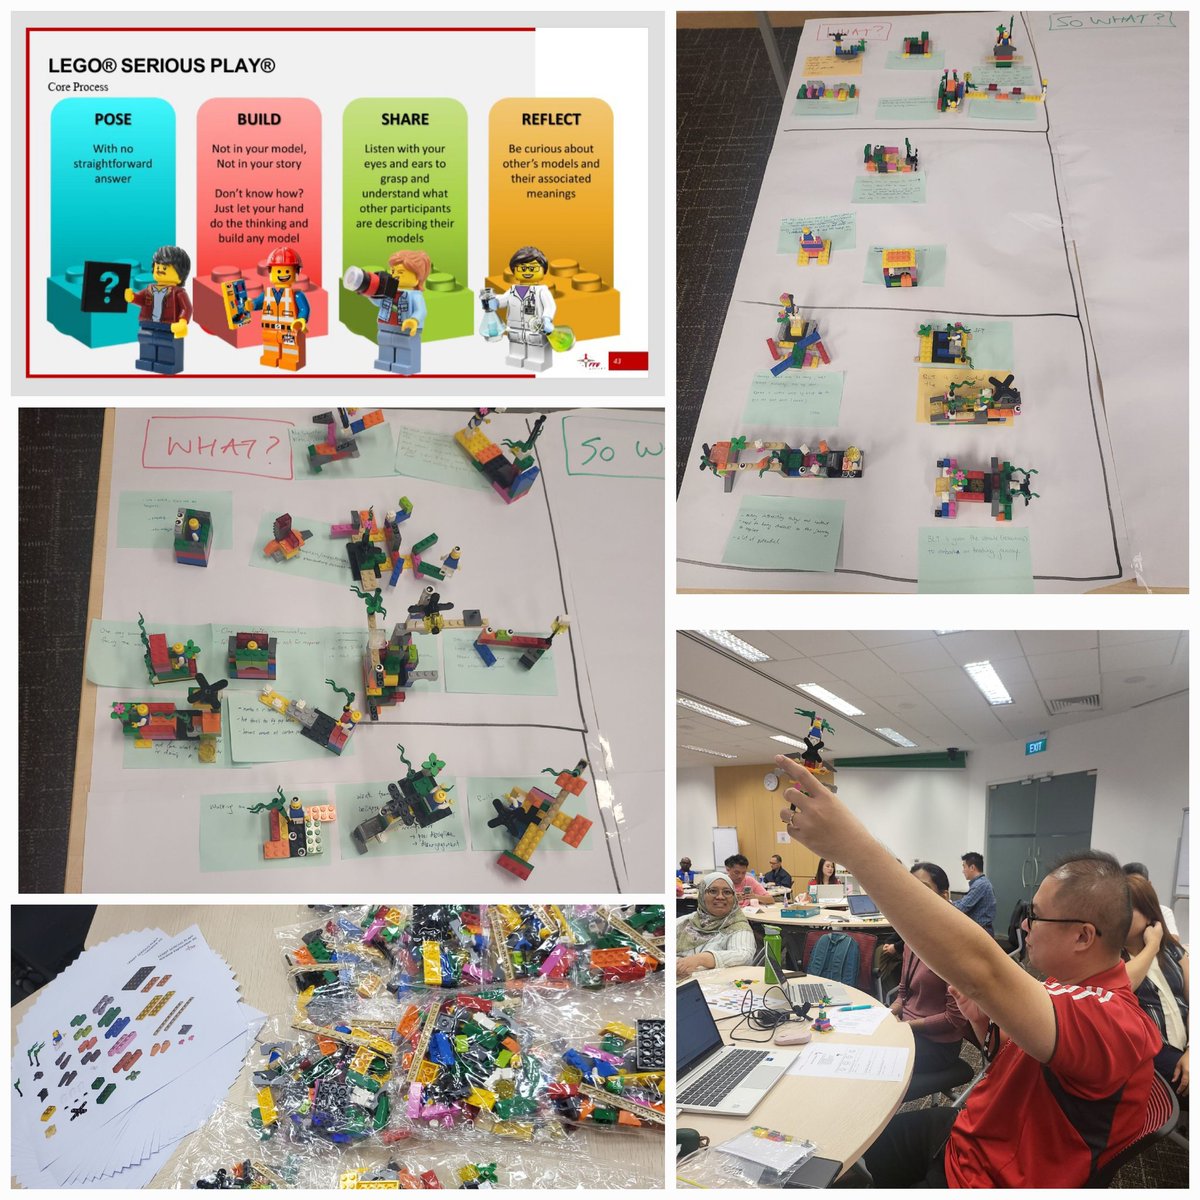 Using #LEGOSERIOUSPLAY for Reflective Practice based on John Driscoll's model of reflection is a transformative experience. It offers a dynamic and immersive way for new mentors to gain valuable perspectives, fostering growth and development in their #mentoring journey.